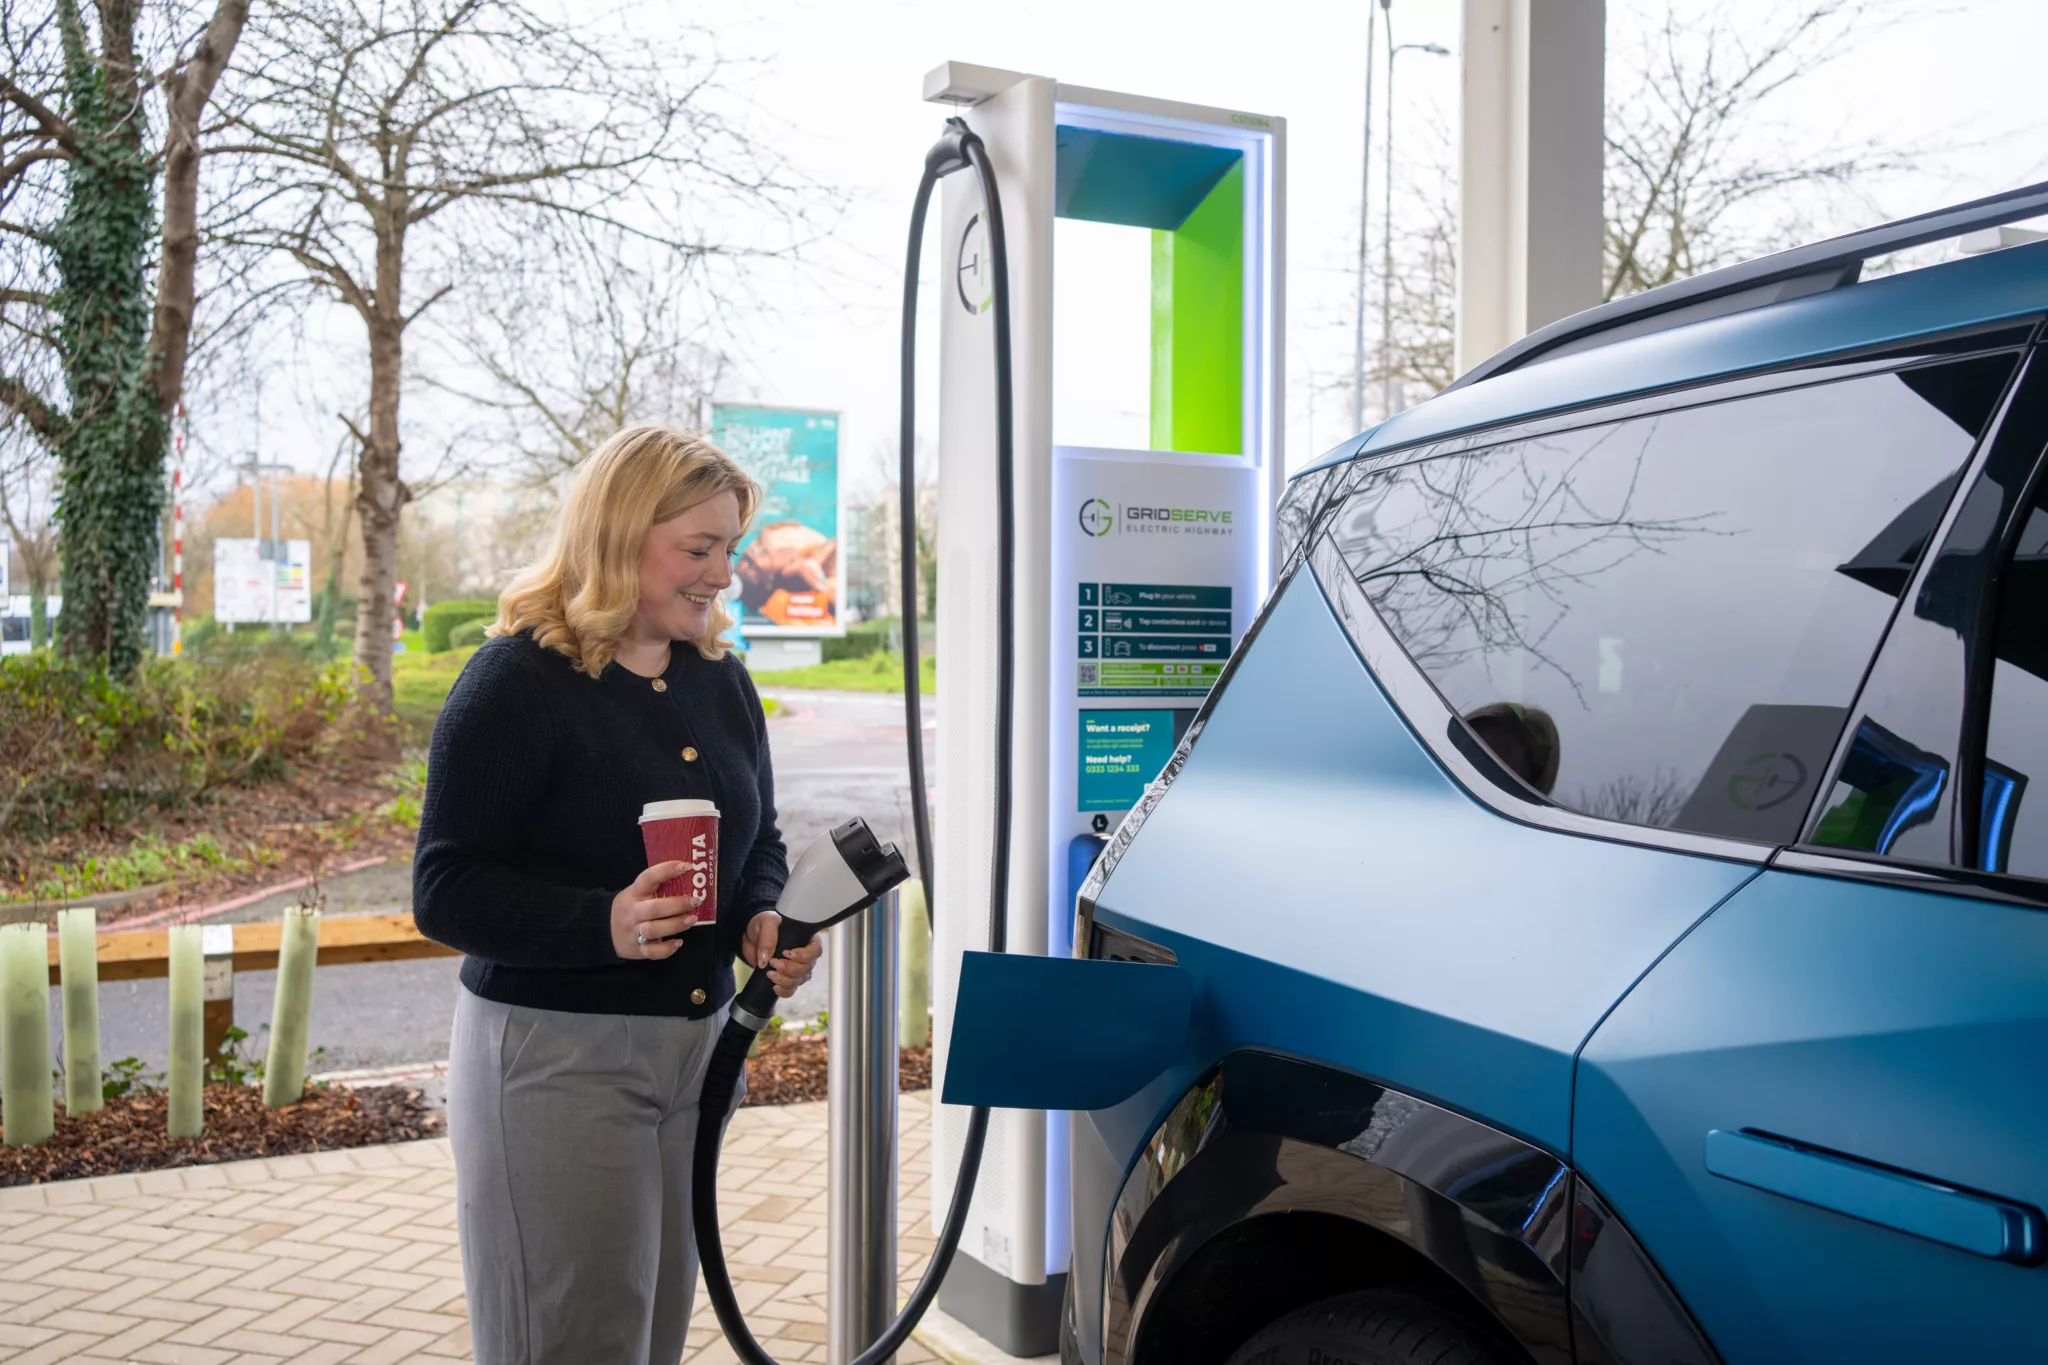 Costa Click & Serve available at GRIDSERVE Electric Forecourt at London Gatwick airport